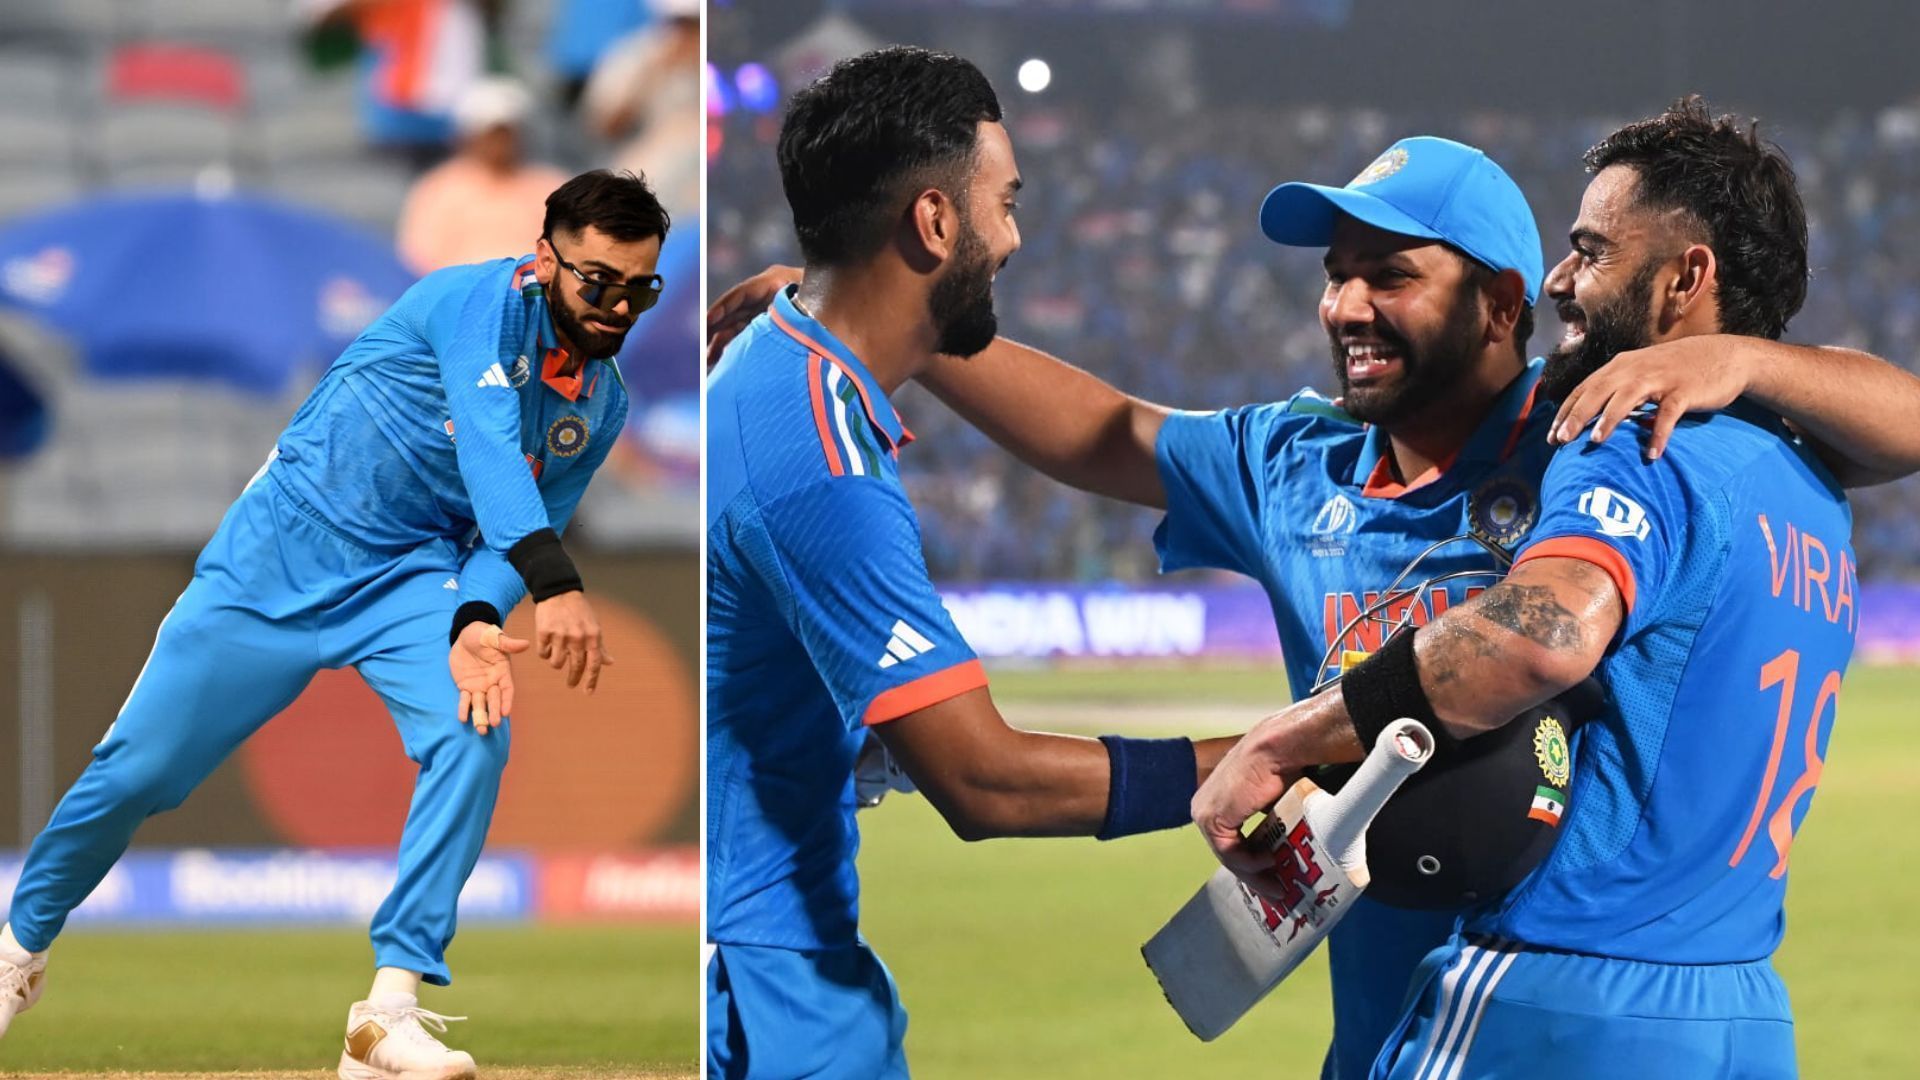 Some moments from the IND vs BAN game that got the fans buzzing on social media (P.C.:ICC)